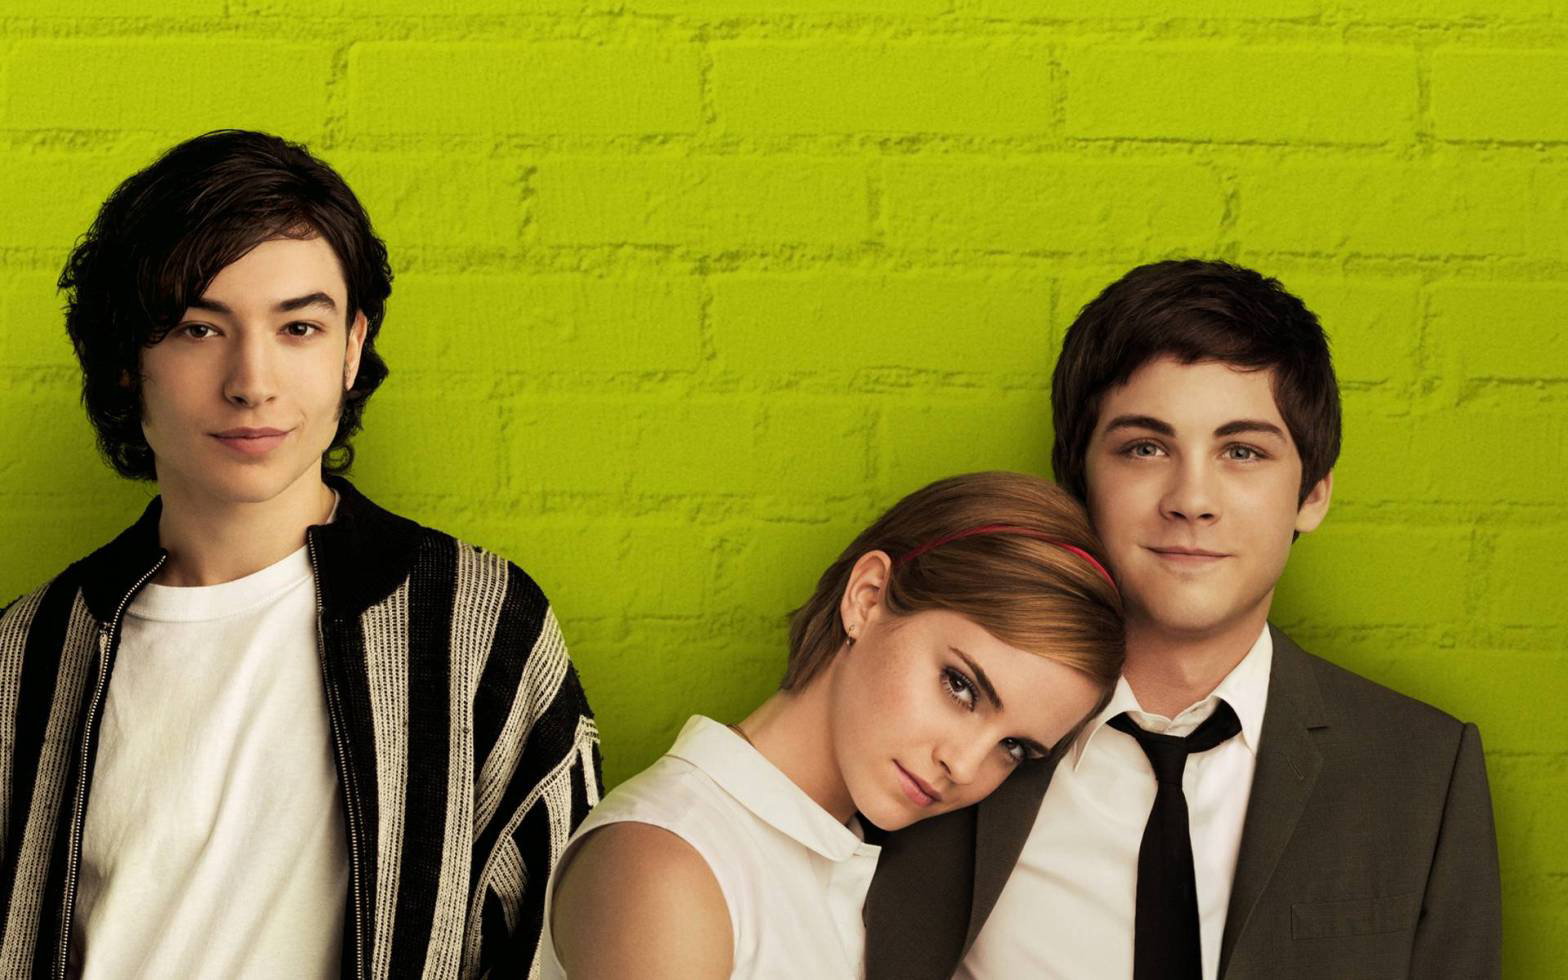 The Perks of Being a Wallflower - The Perks of Being a Wallflower (2012)